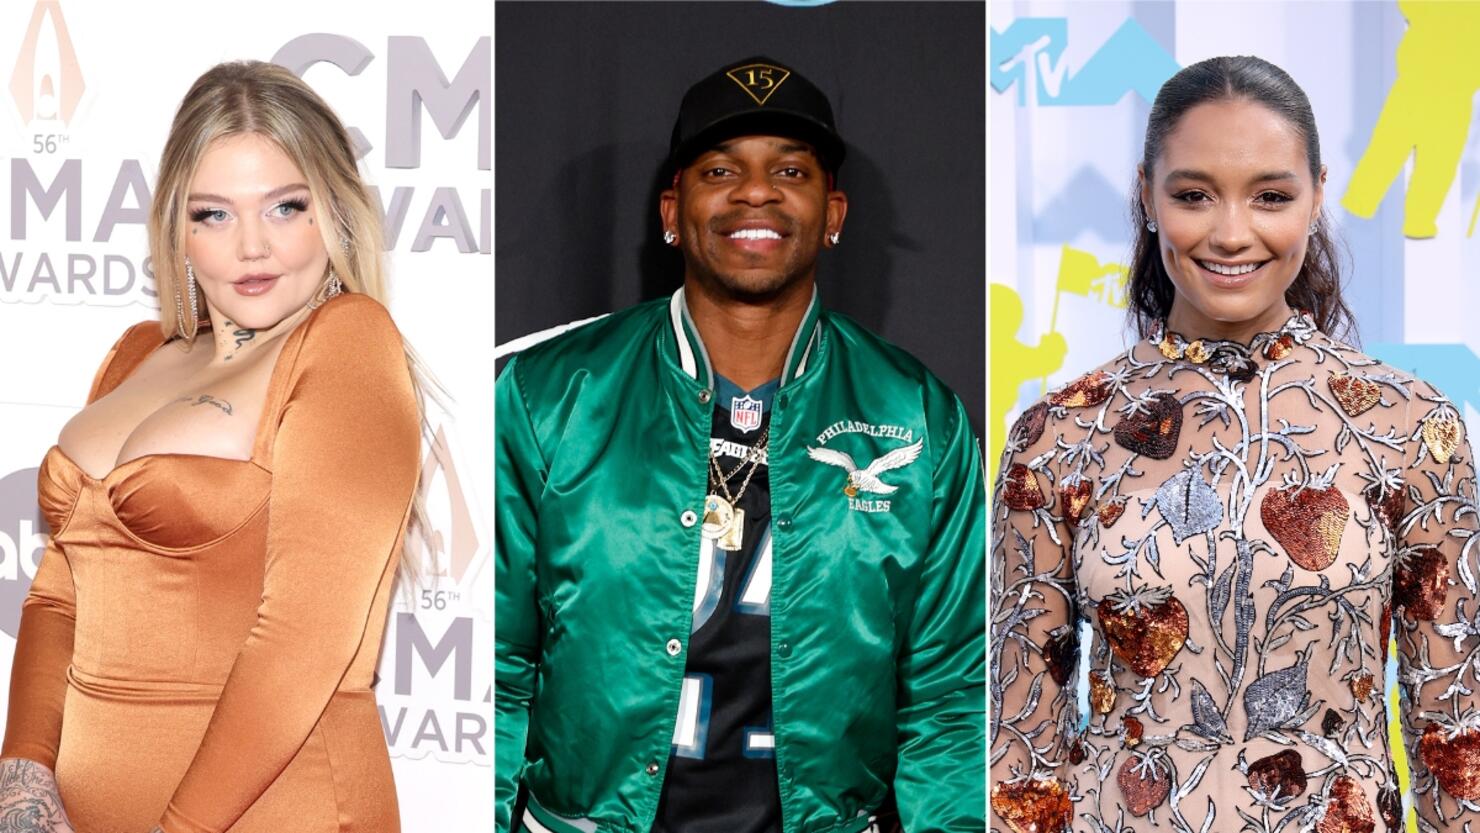 Jimmie Allen, Elle King Tapped To Host Nashville New Year's Eve Bash